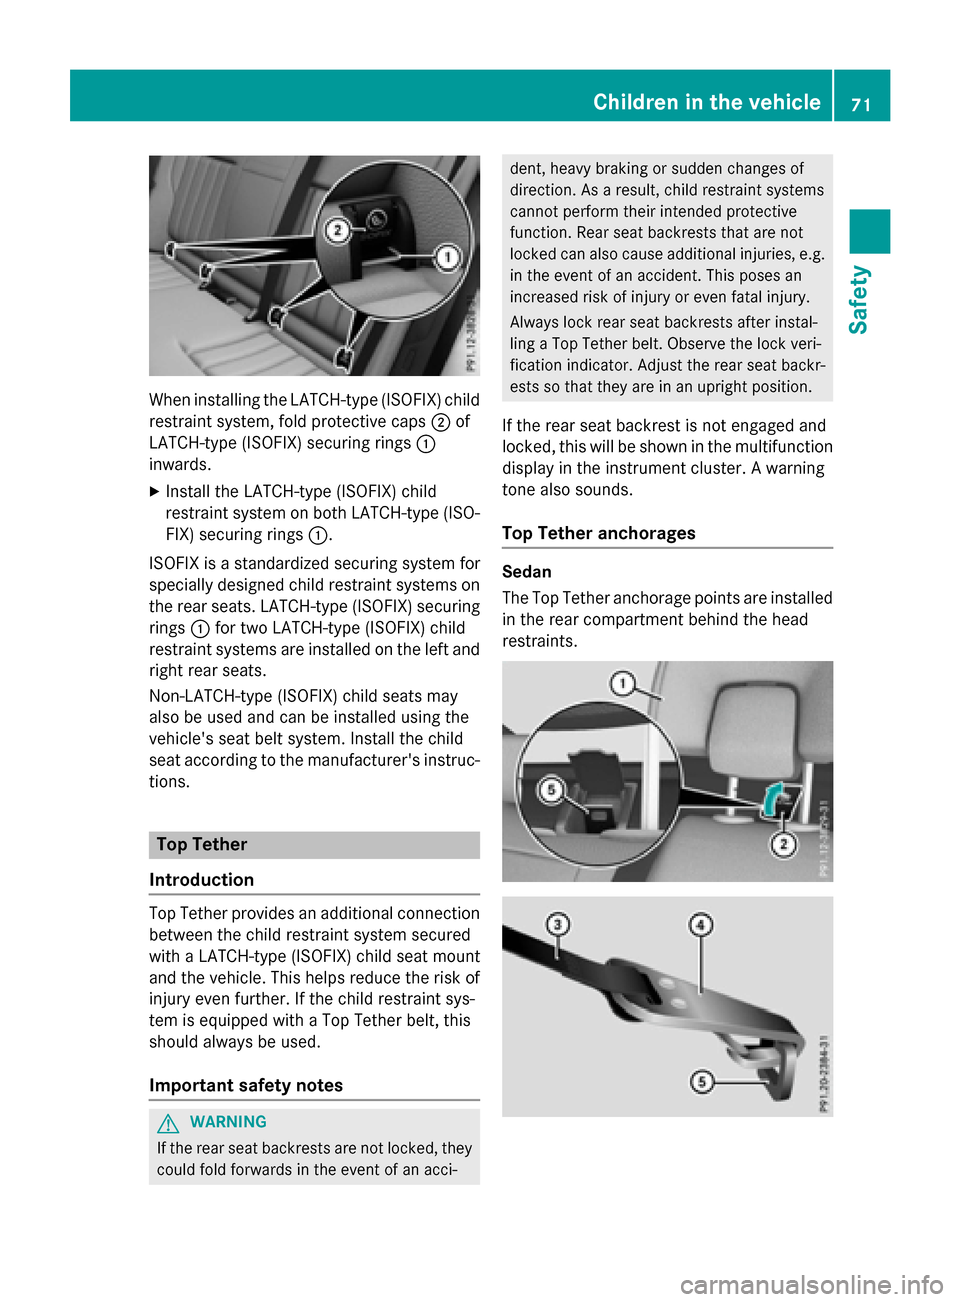 MERCEDES-BENZ E-Class WAGON 2016 W213 Owners Manual When installing the LATCH-type (ISOFIX) child
restraint system, fold protective caps;of
LATCH-type (ISOFIX) securing rings :
inwards.
XInstall the LATCH-type (ISOFIX) child
restraint system on both LA